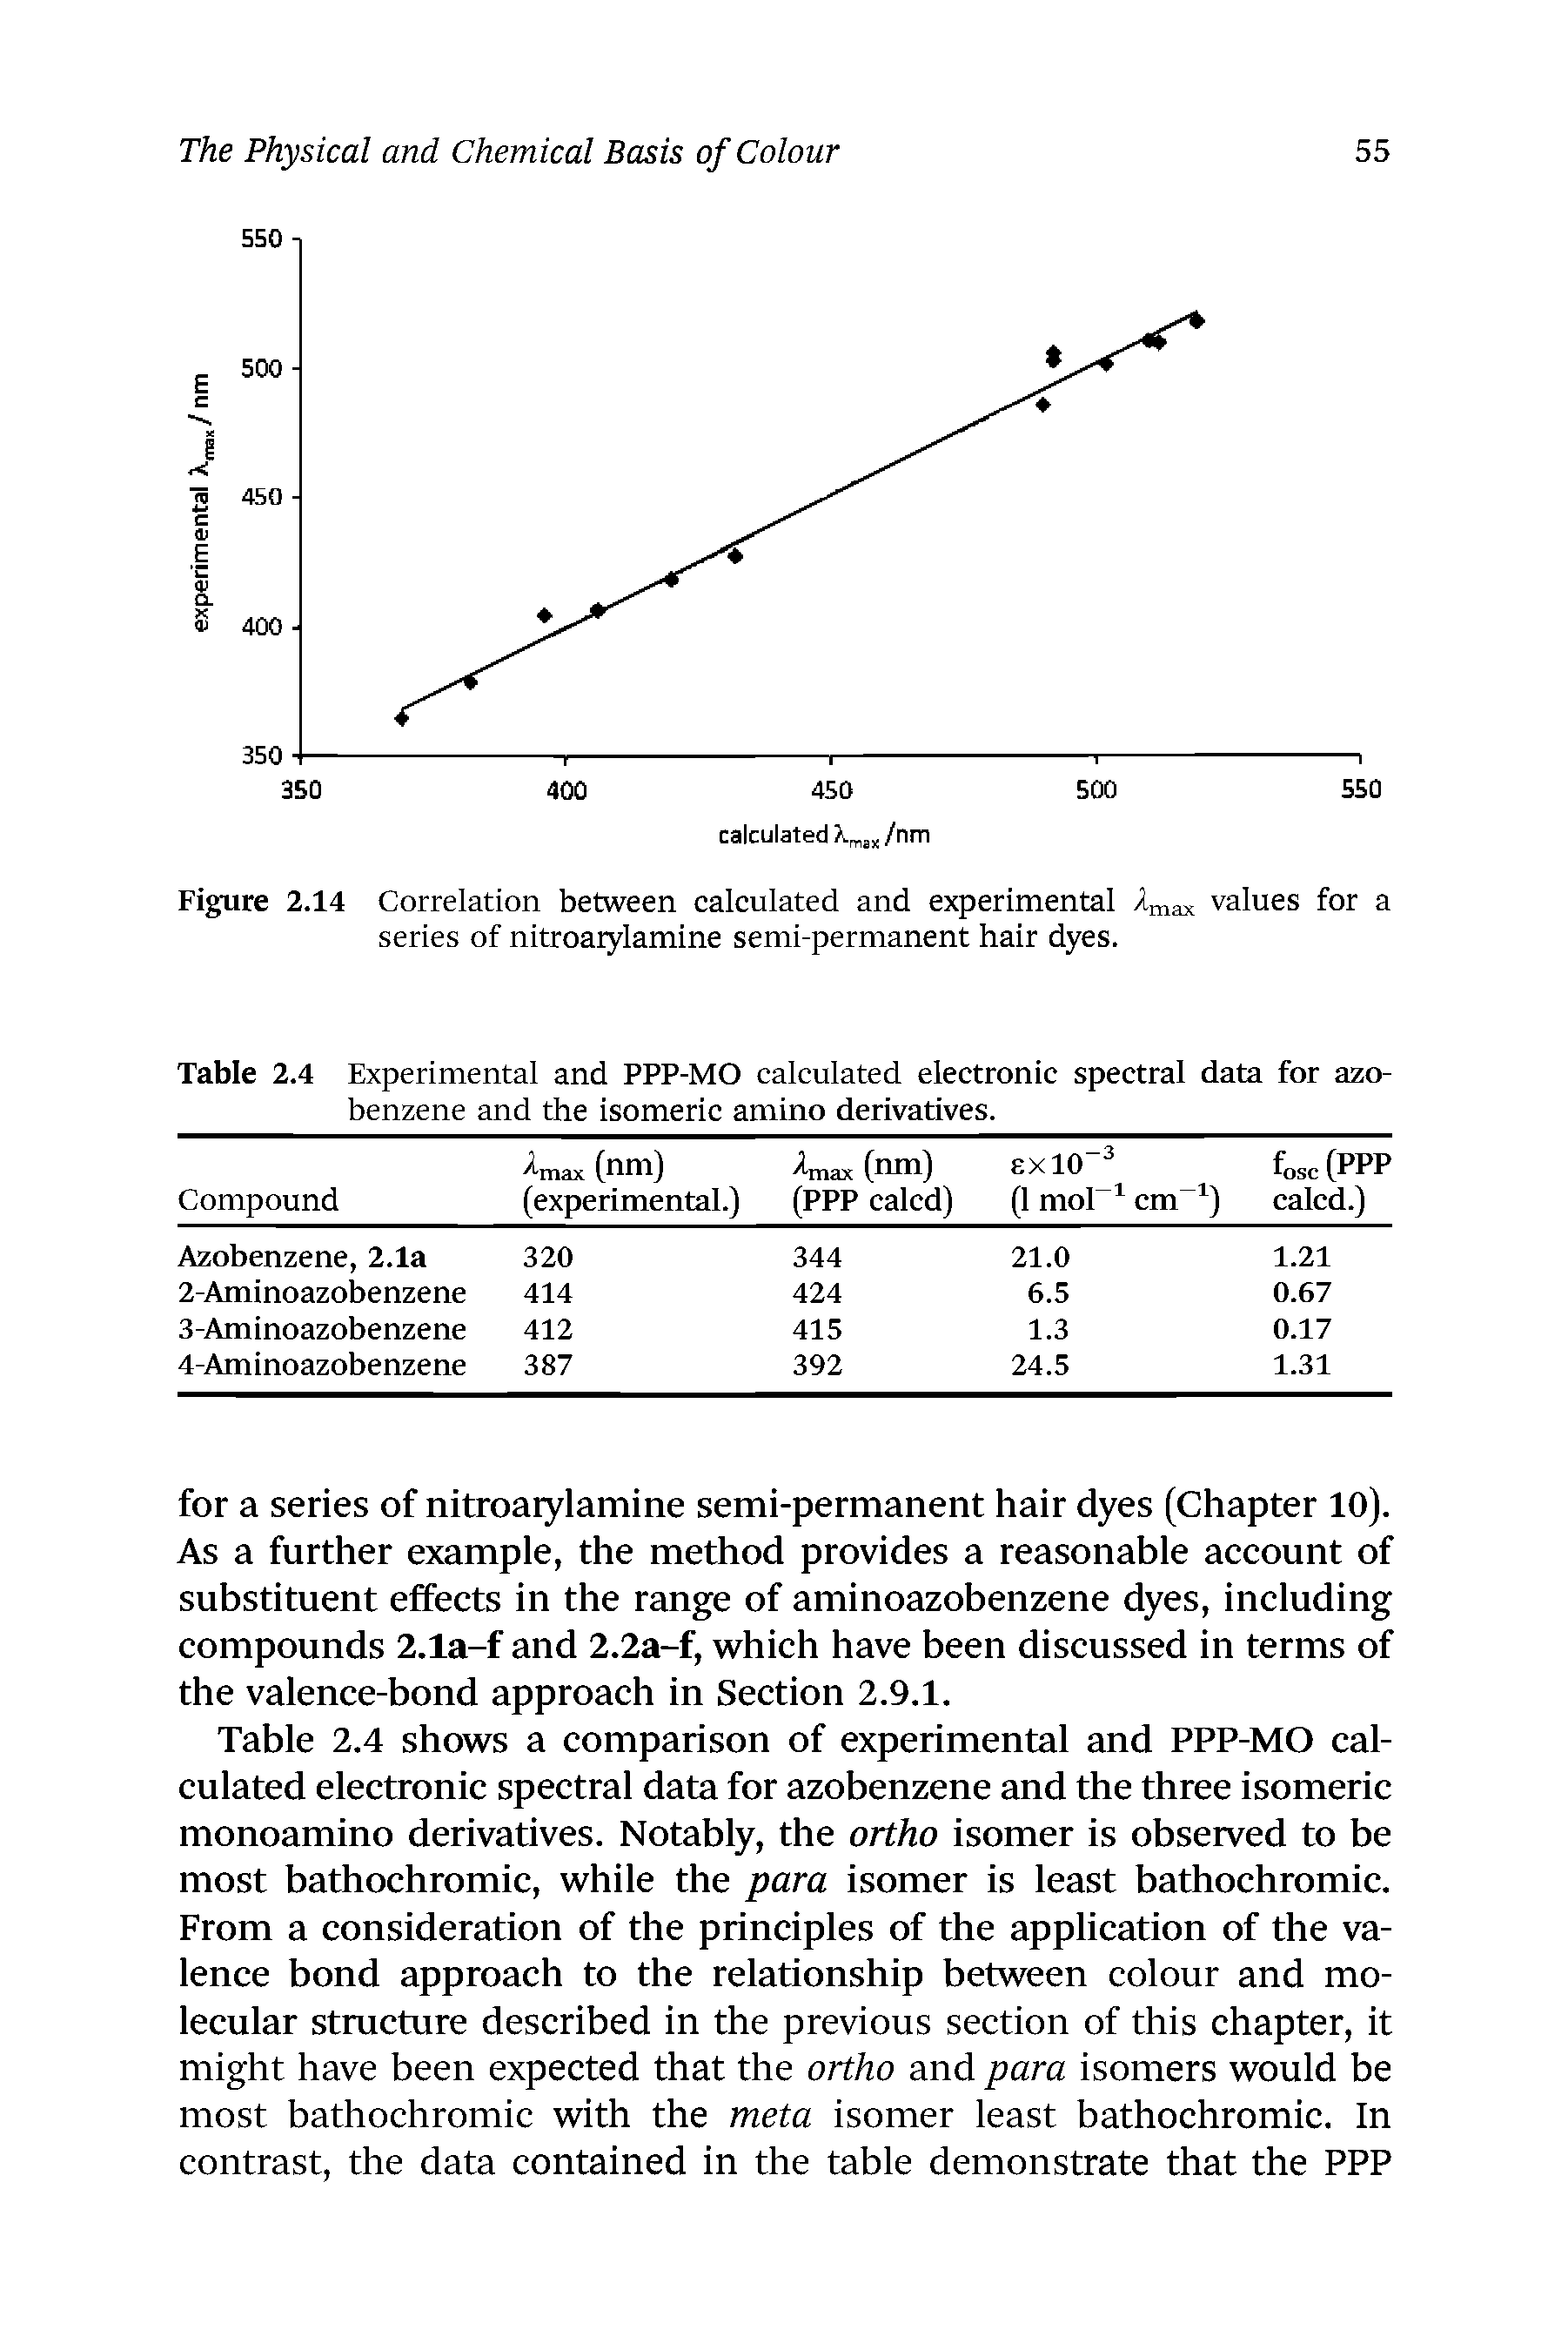 Figure 2.14 Correlation between calculated and experimental series of nitroarylamine semi-permanent hair dyes.